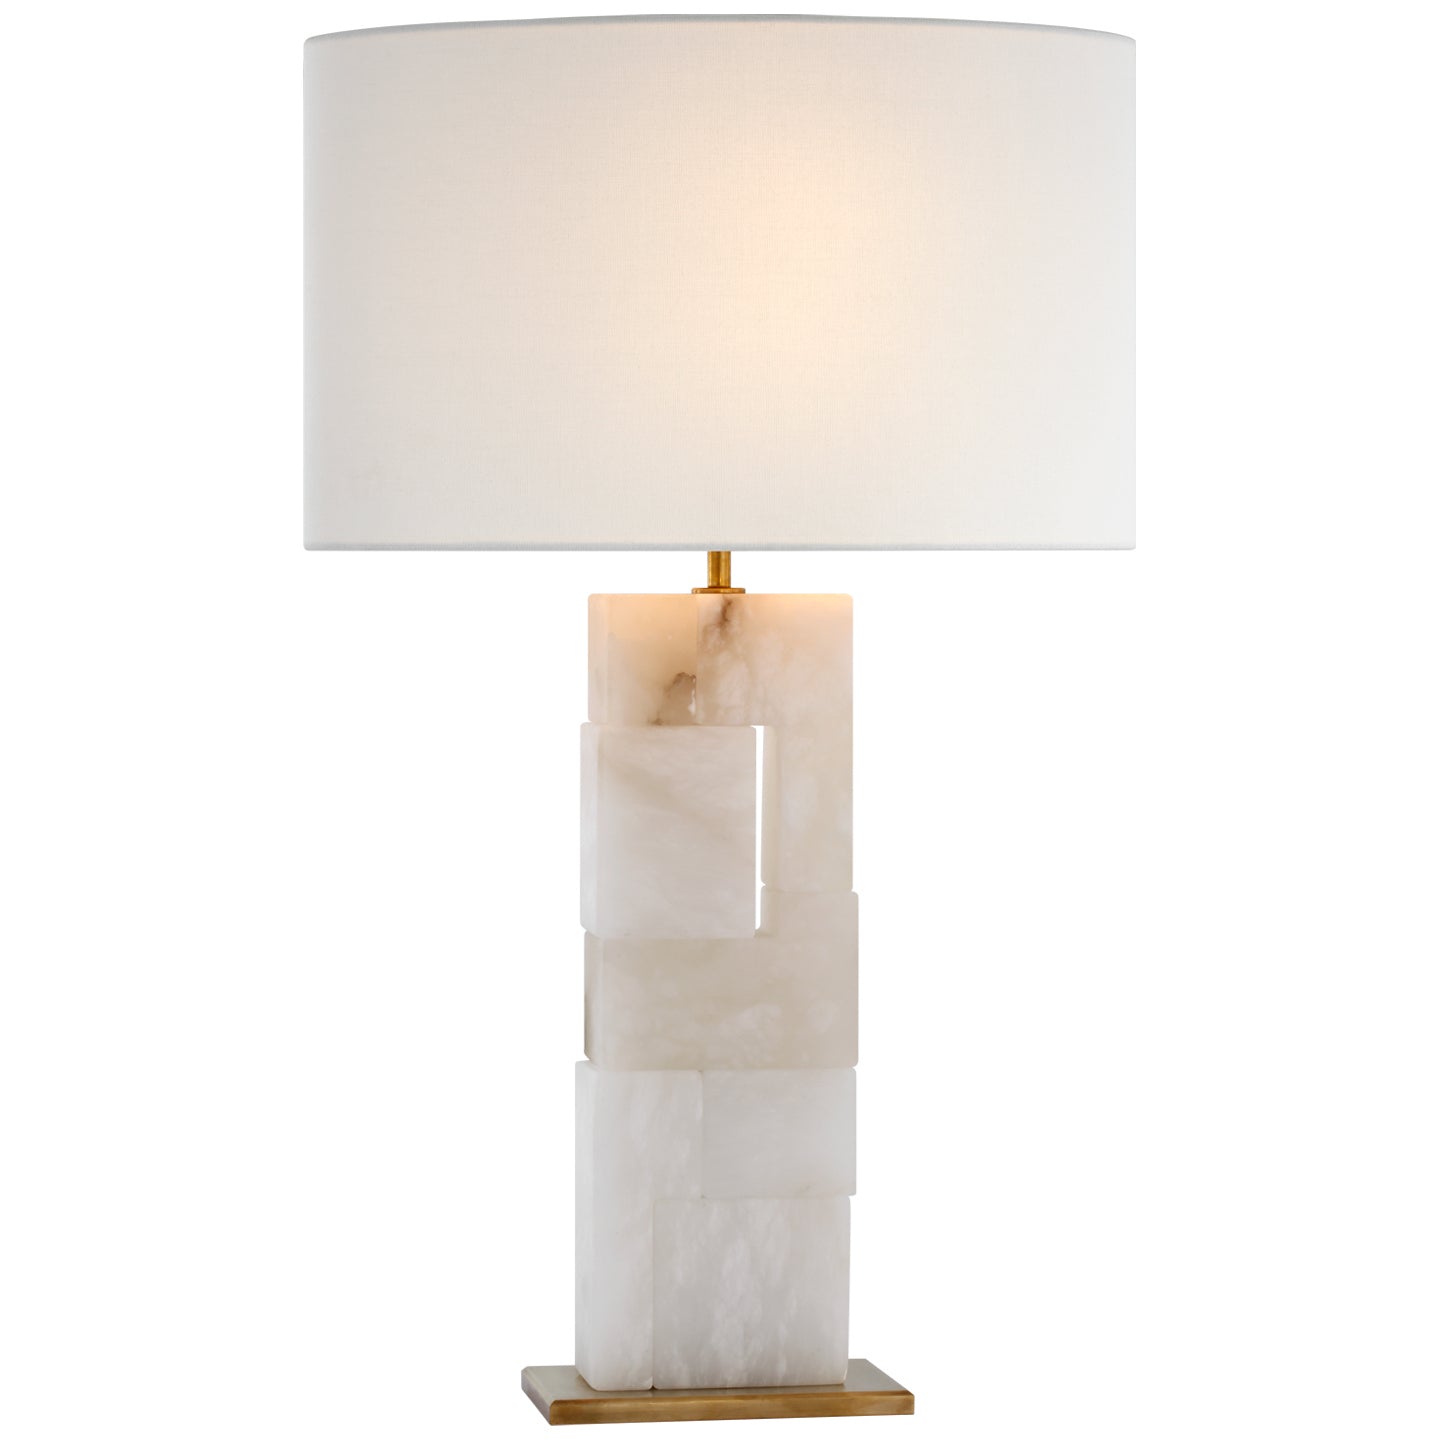 Visual Comfort Signature - S 3926ALB/HAB-L - LED Table Lamp - Ashlar - Alabaster and Hand-Rubbed Antique Brass